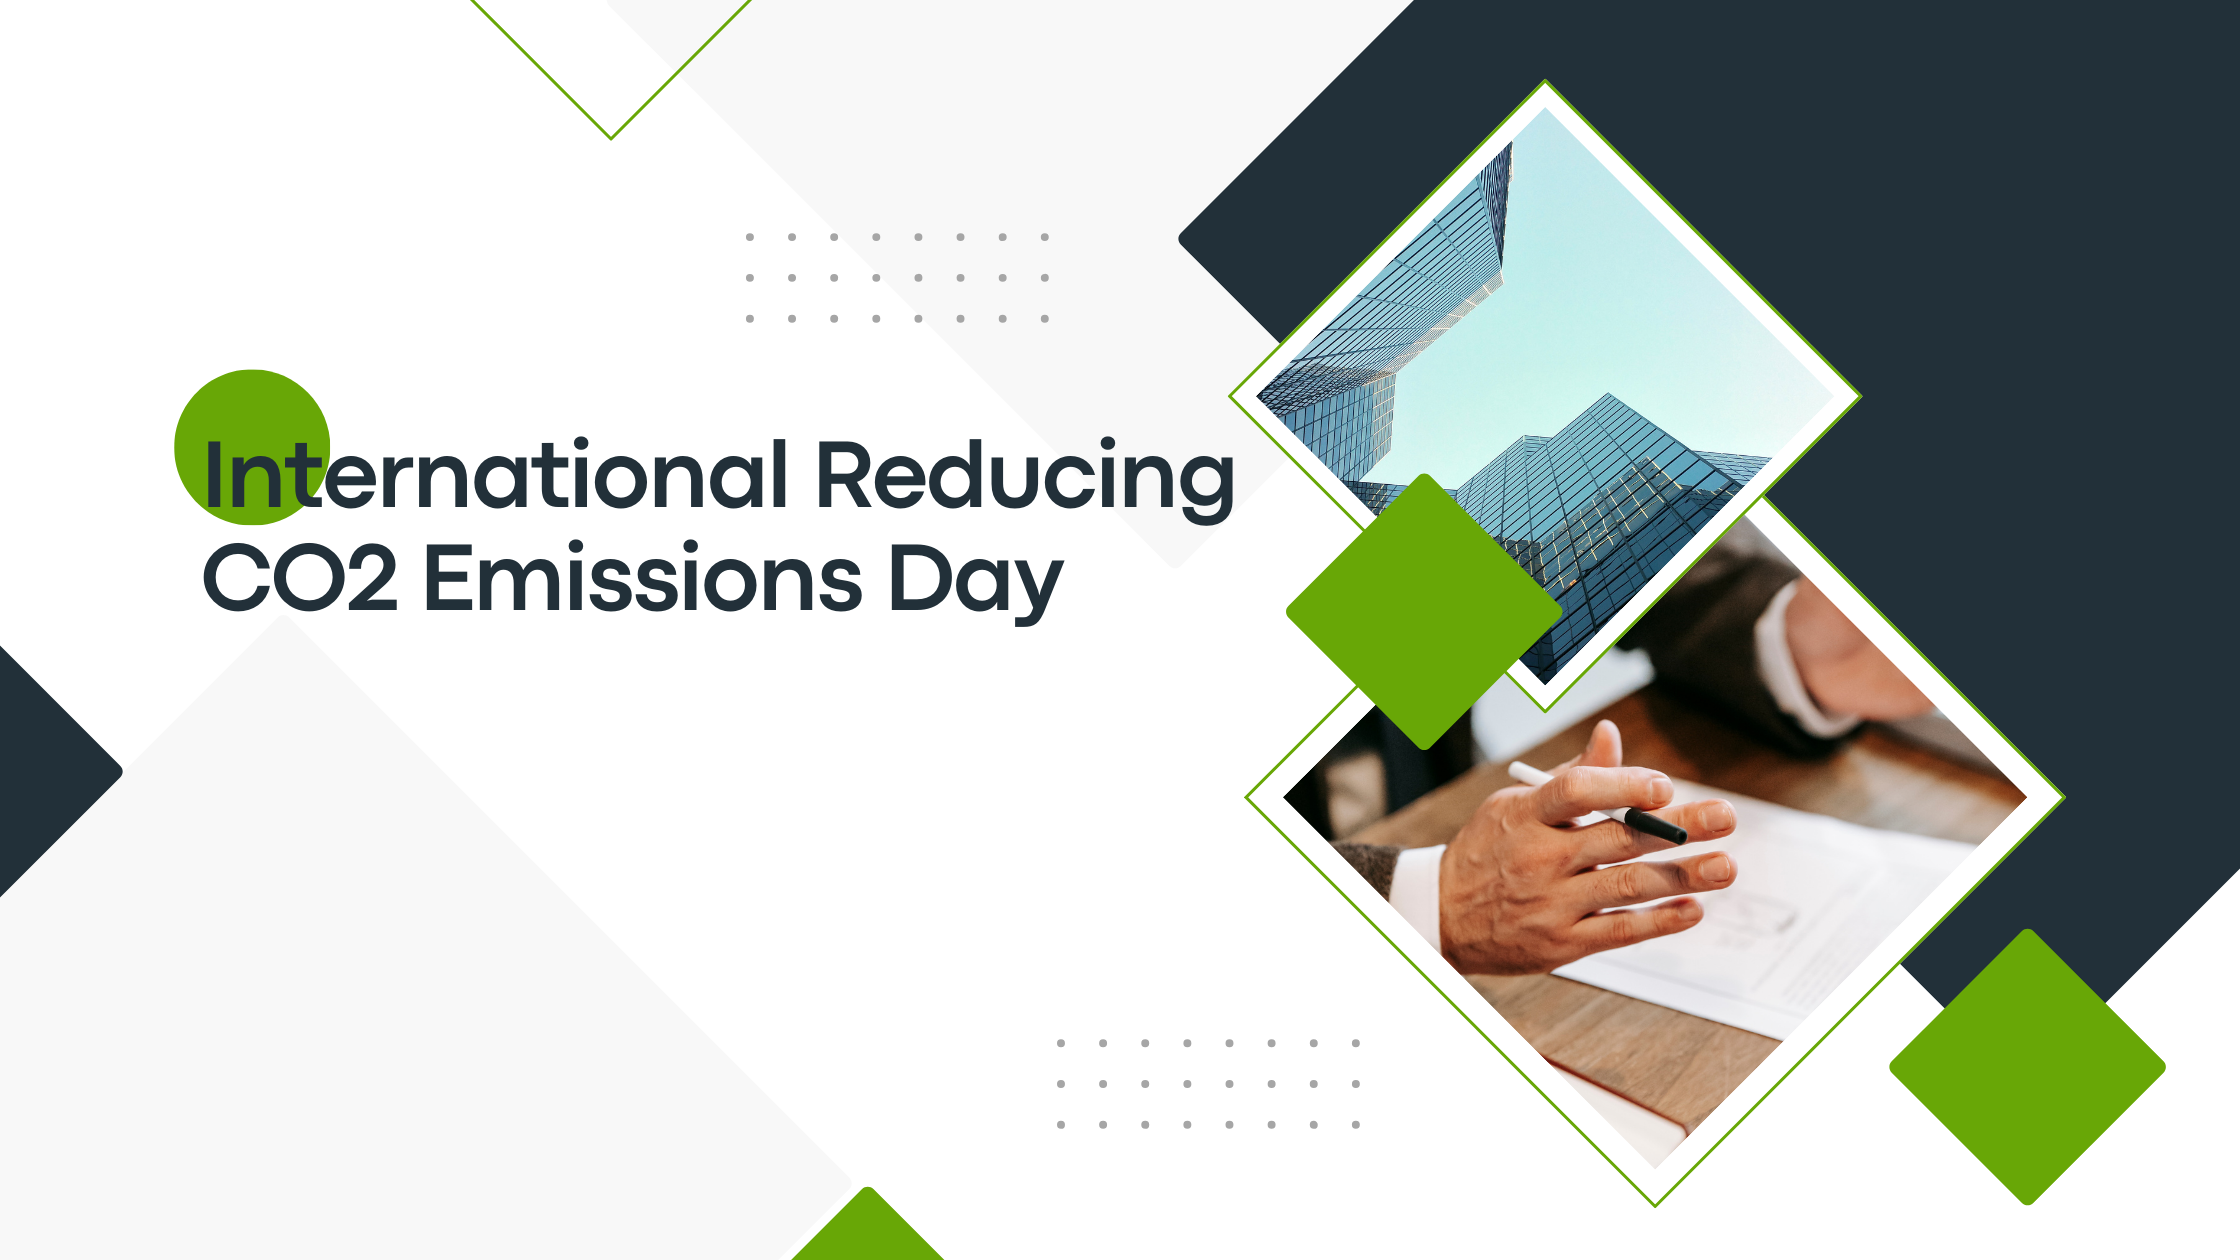 International Reducing CO2 Emissions Day – Our Commitment to a Greener Future